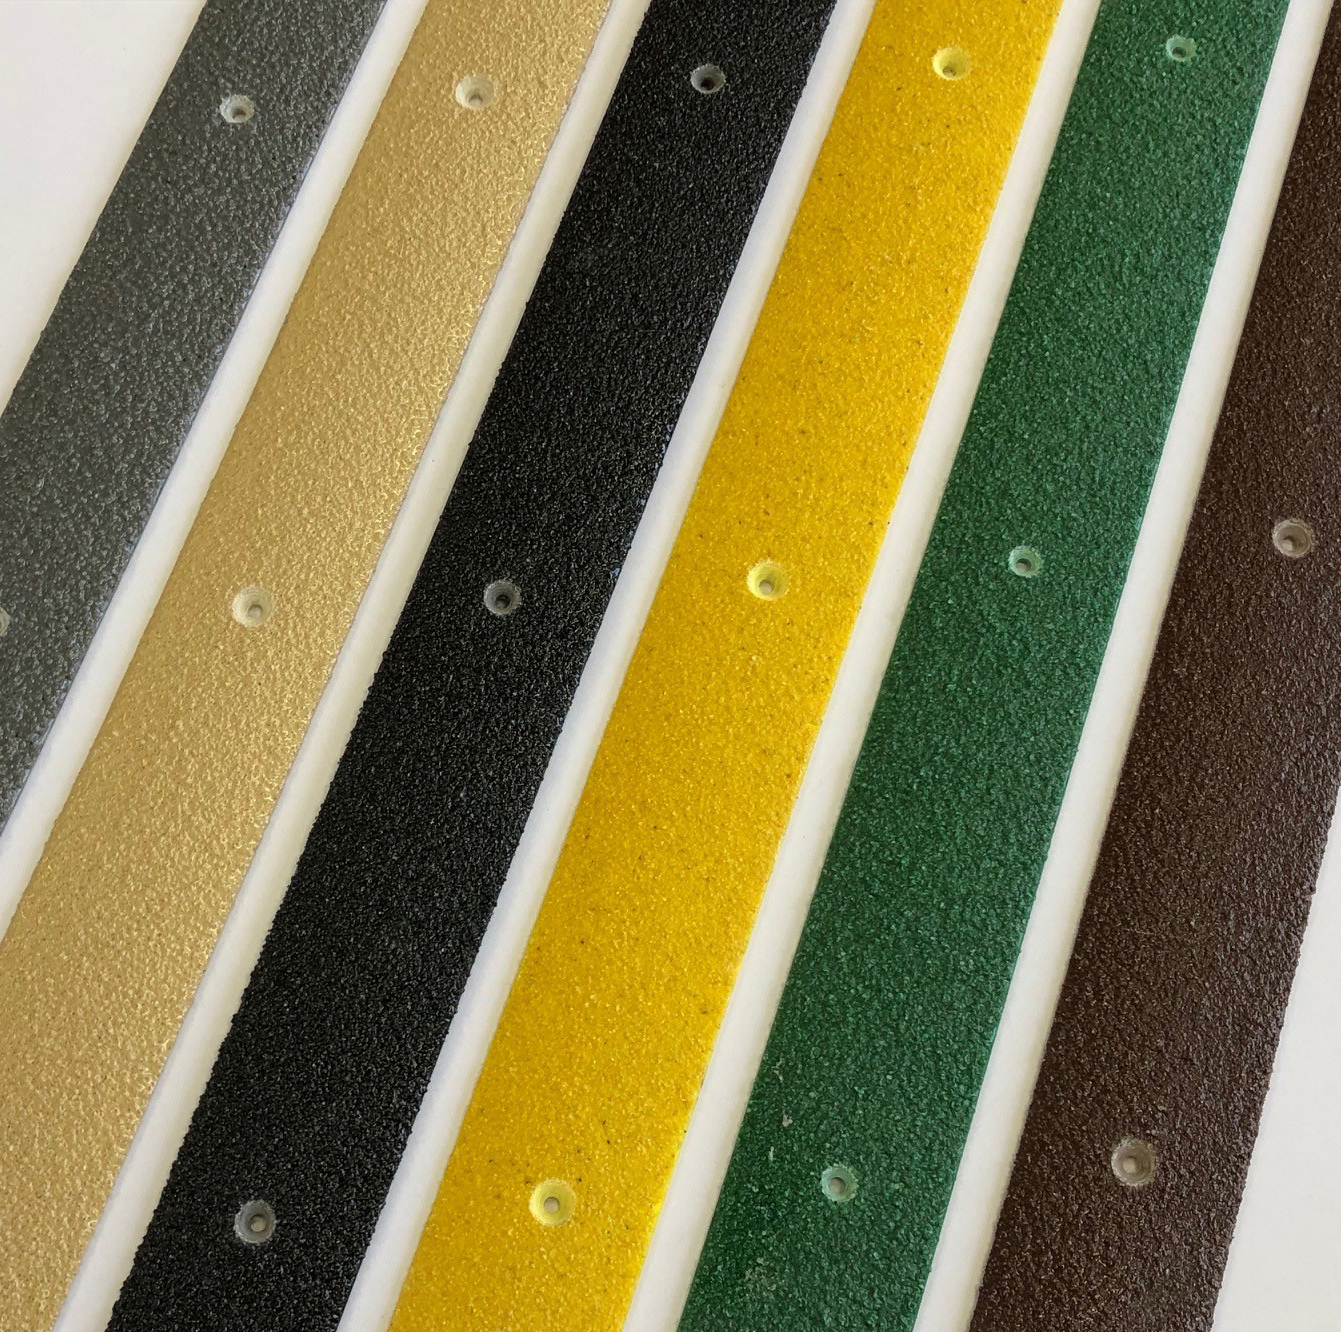 Step on Safety's Anti-Slip Decking strips in grey, beige, black, yellow, green and brown